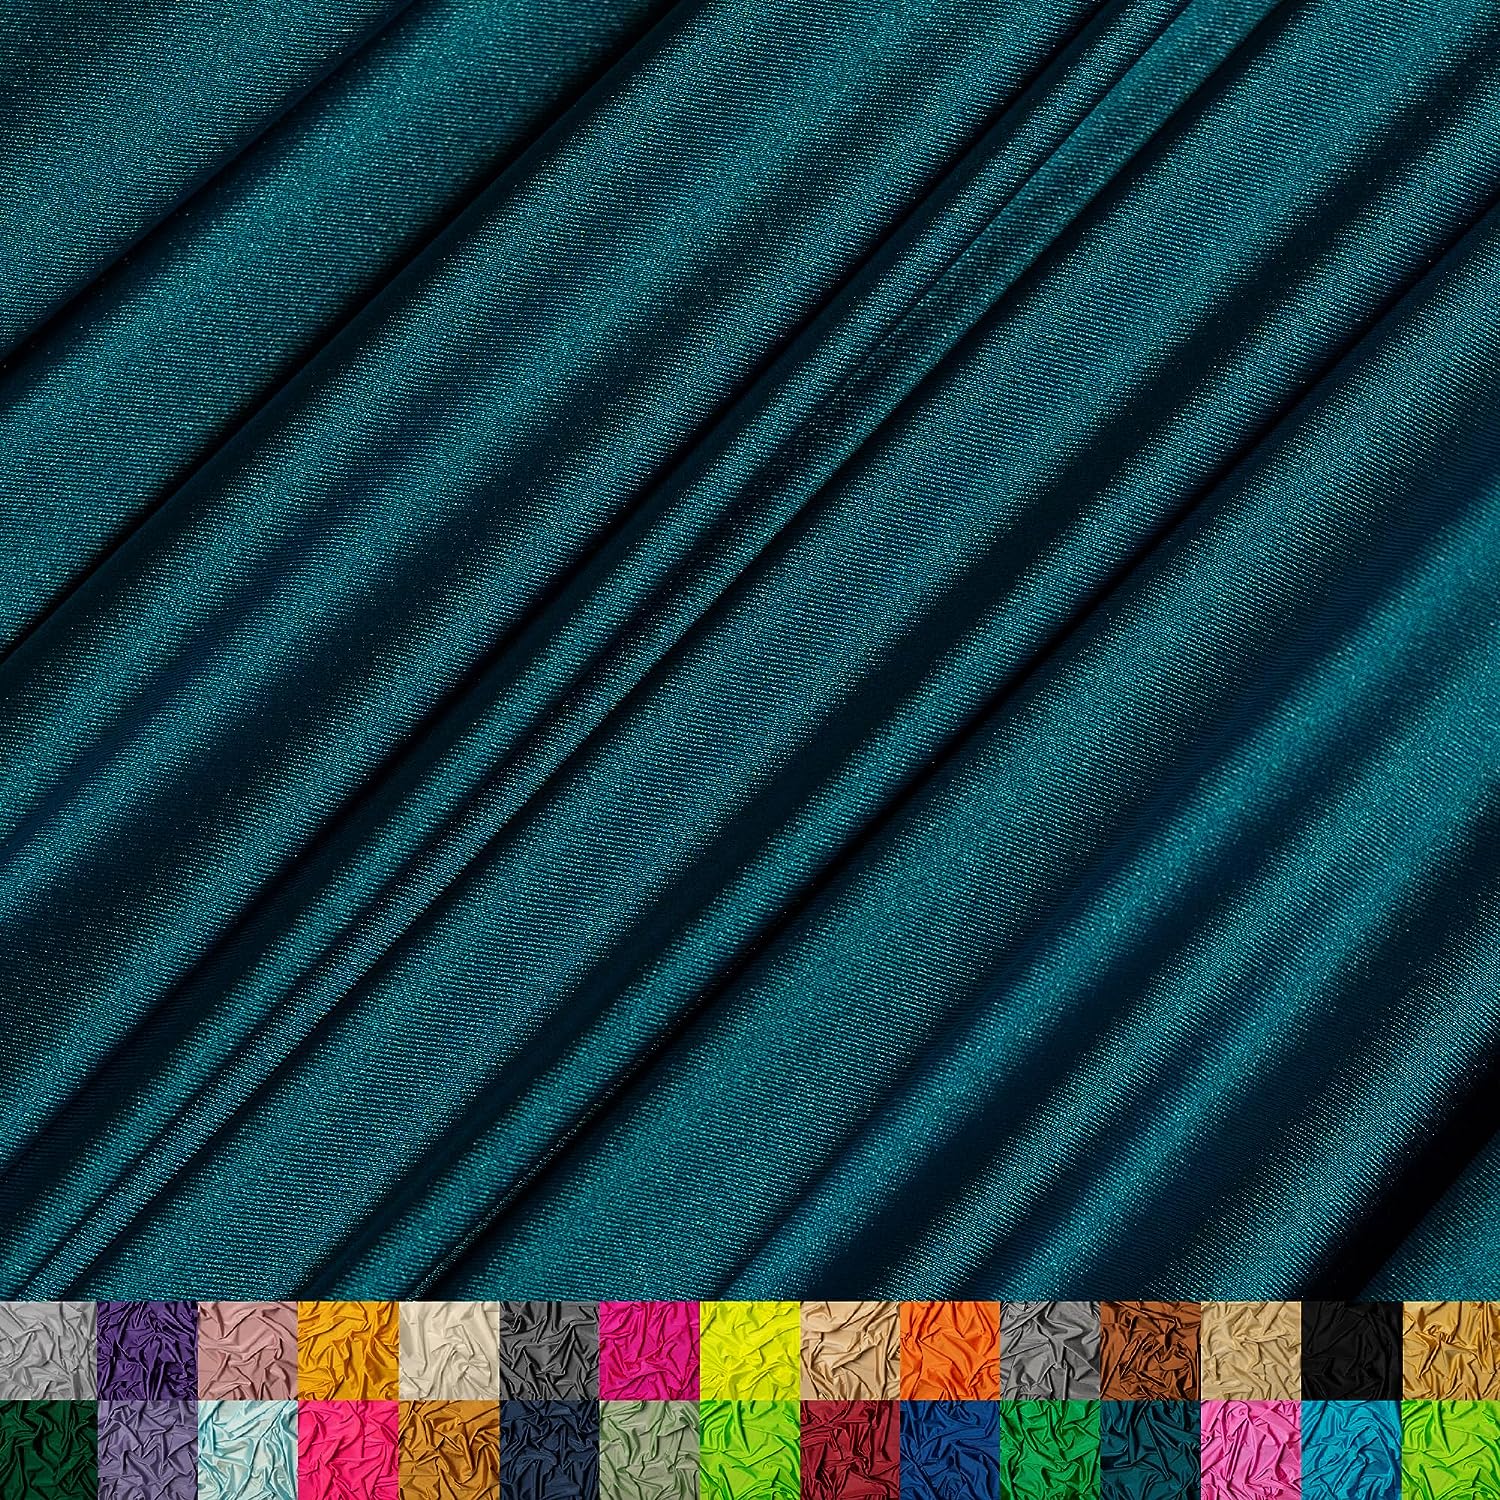 Teal Luxury Nylon Spandex Fabric By The YardICE FABRICSICE FABRICSBy The Yard (60" Width)Teal Luxury Nylon Spandex Fabric By The Yard ICE FABRICS